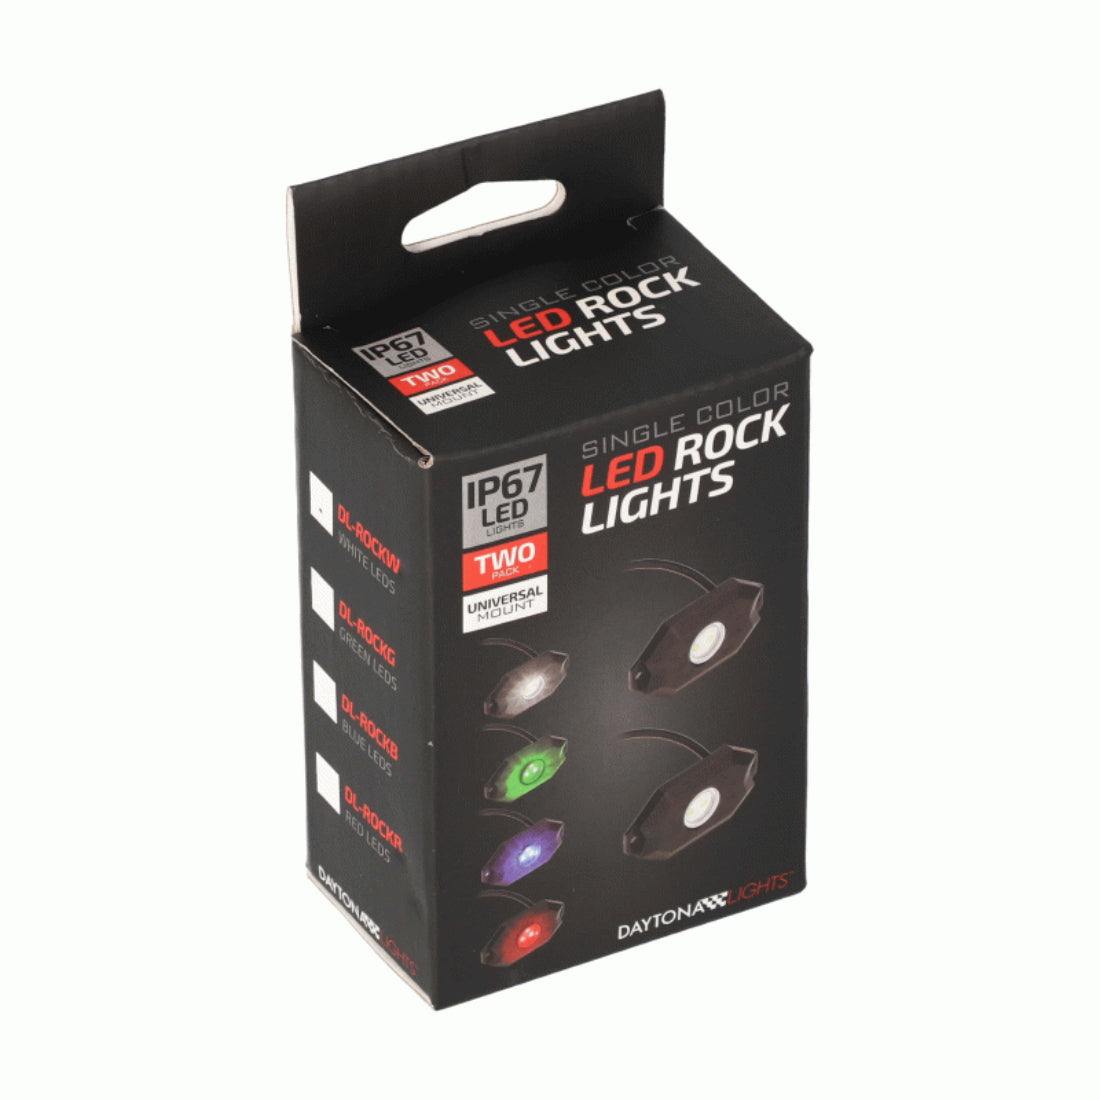 Metra DL-ROCKW IP67 Rated Single Color Universal LED White Rock Lights - 2 Pack